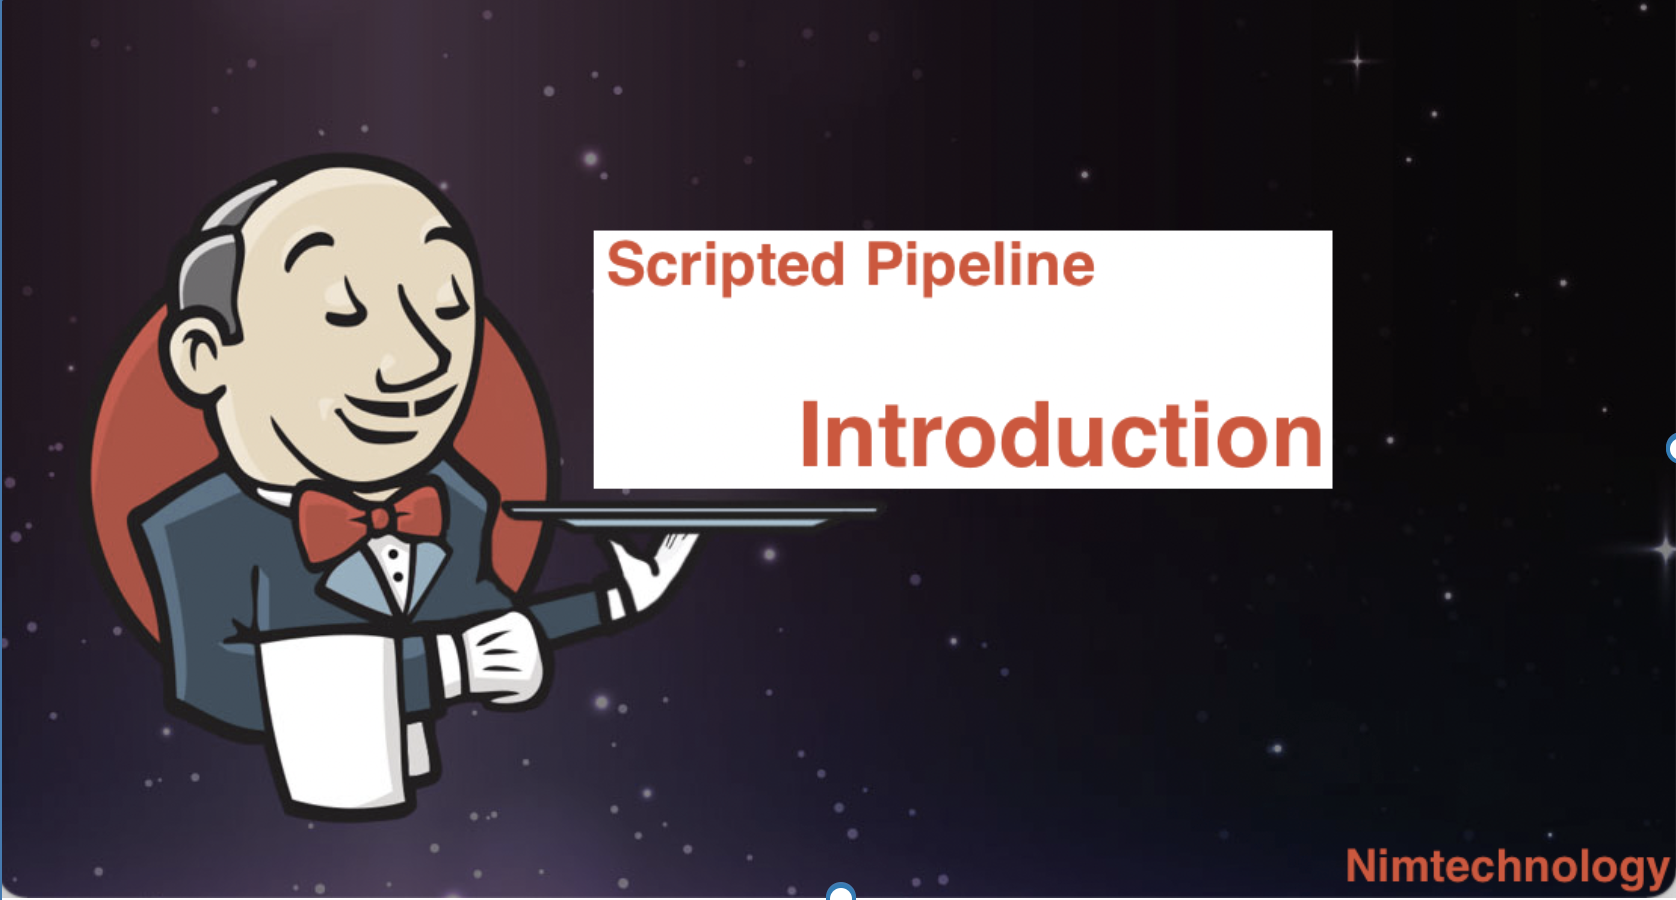 [jenkins] Scripted Pipeline lesson 1: Introduction